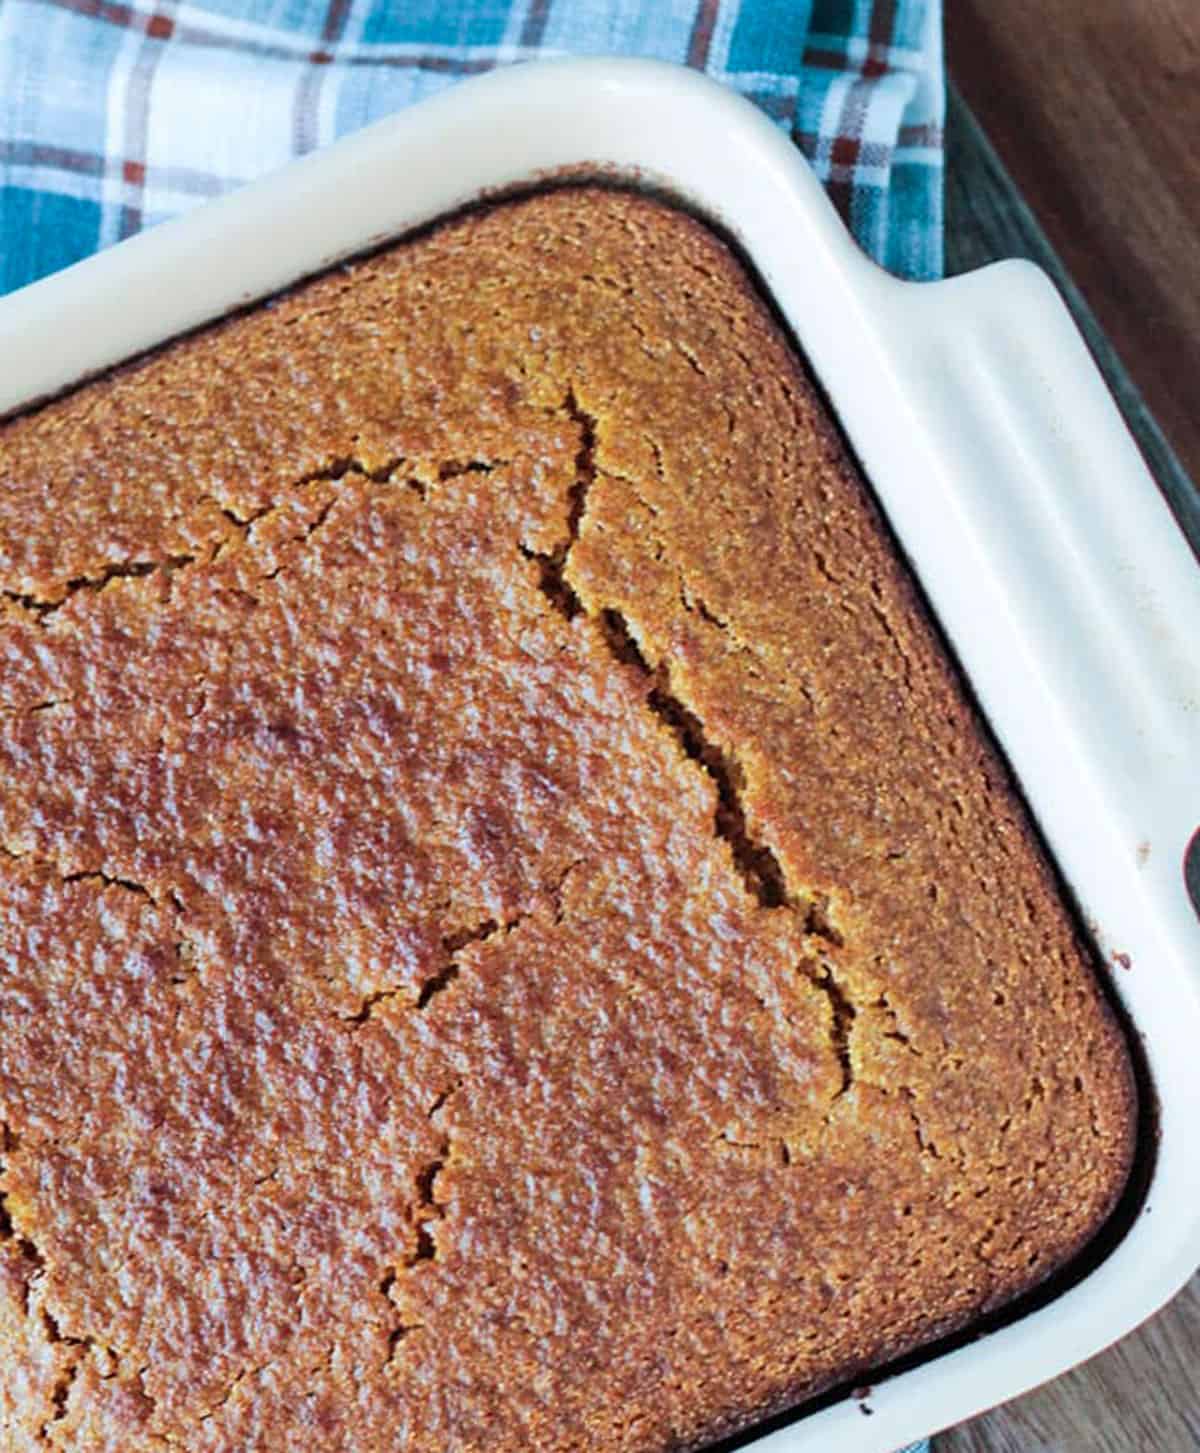 Overhead of a baked pan of cornbread with a golden brown crackly top.